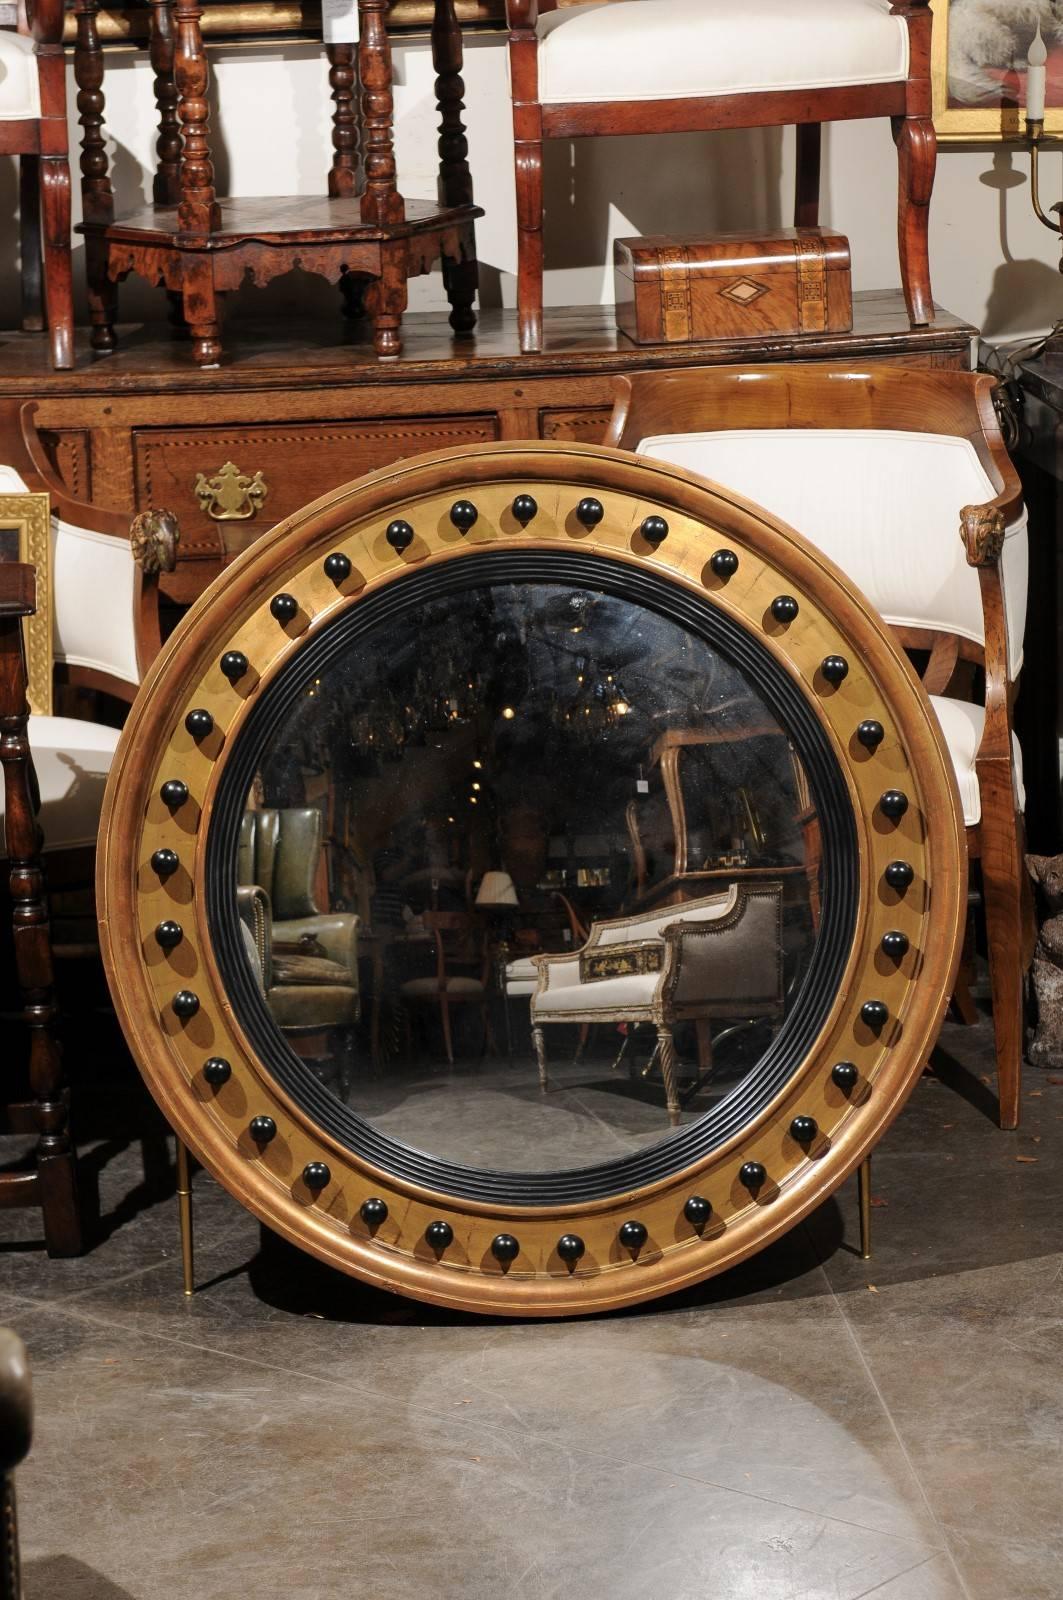 An English vintage gilt and ebonized bullseye mirror from the 1950s. This English mirror from the mid-20th century features a circular flat mirror plate surrounded by an ebonized wood molding. The outer frame is made of giltwood and adorned with